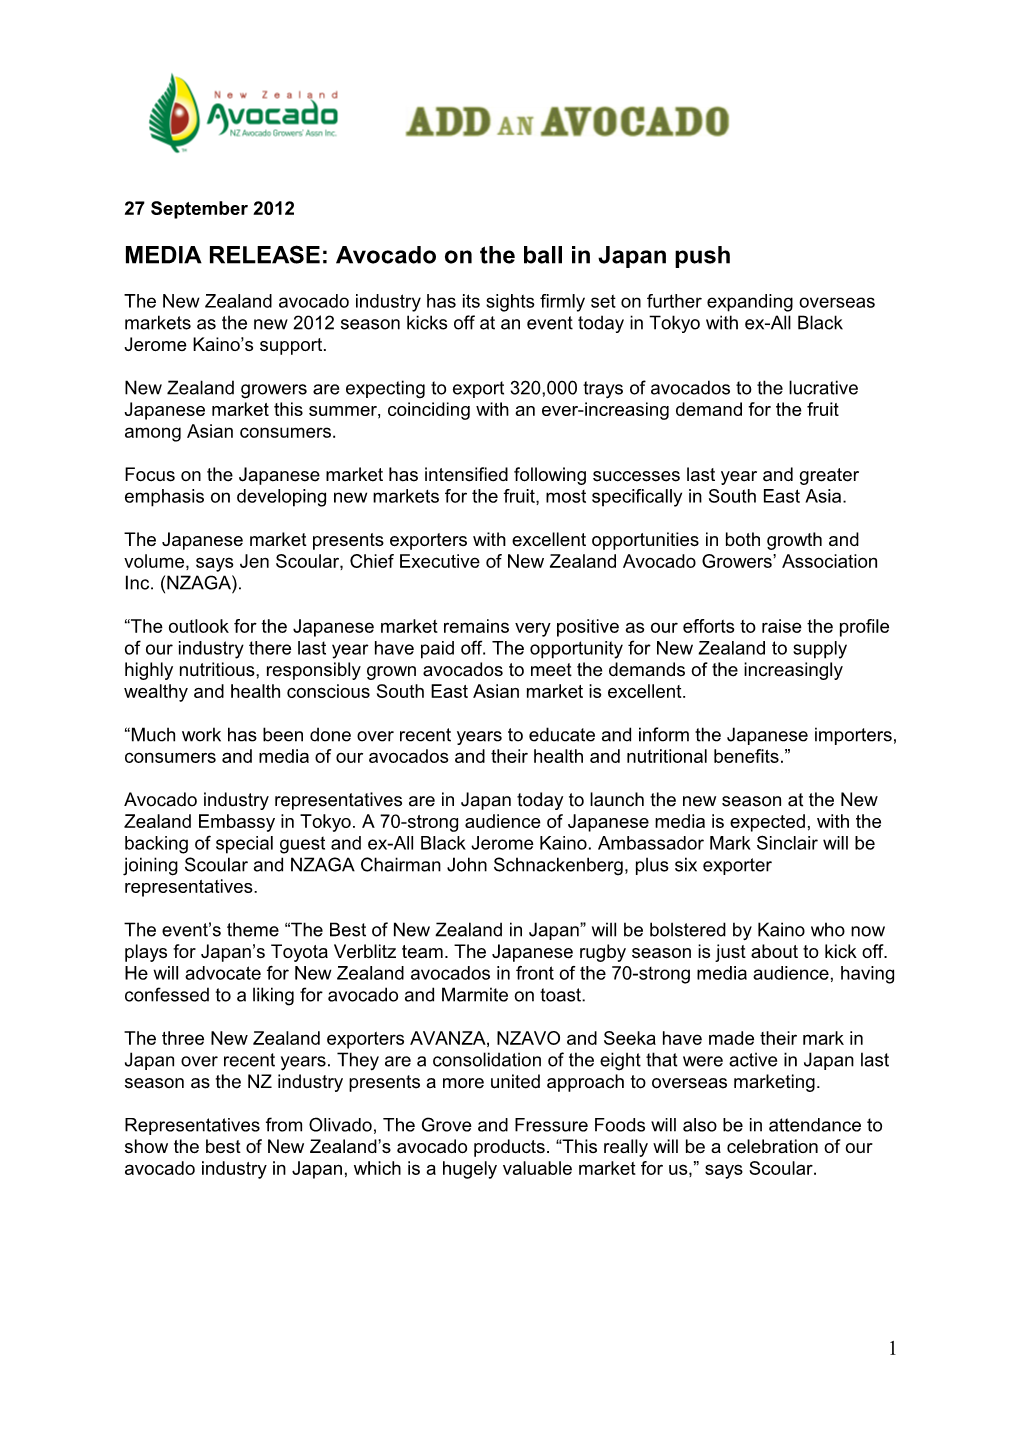 MEDIA RELEASE: Avocado on the Ball in Japan Push